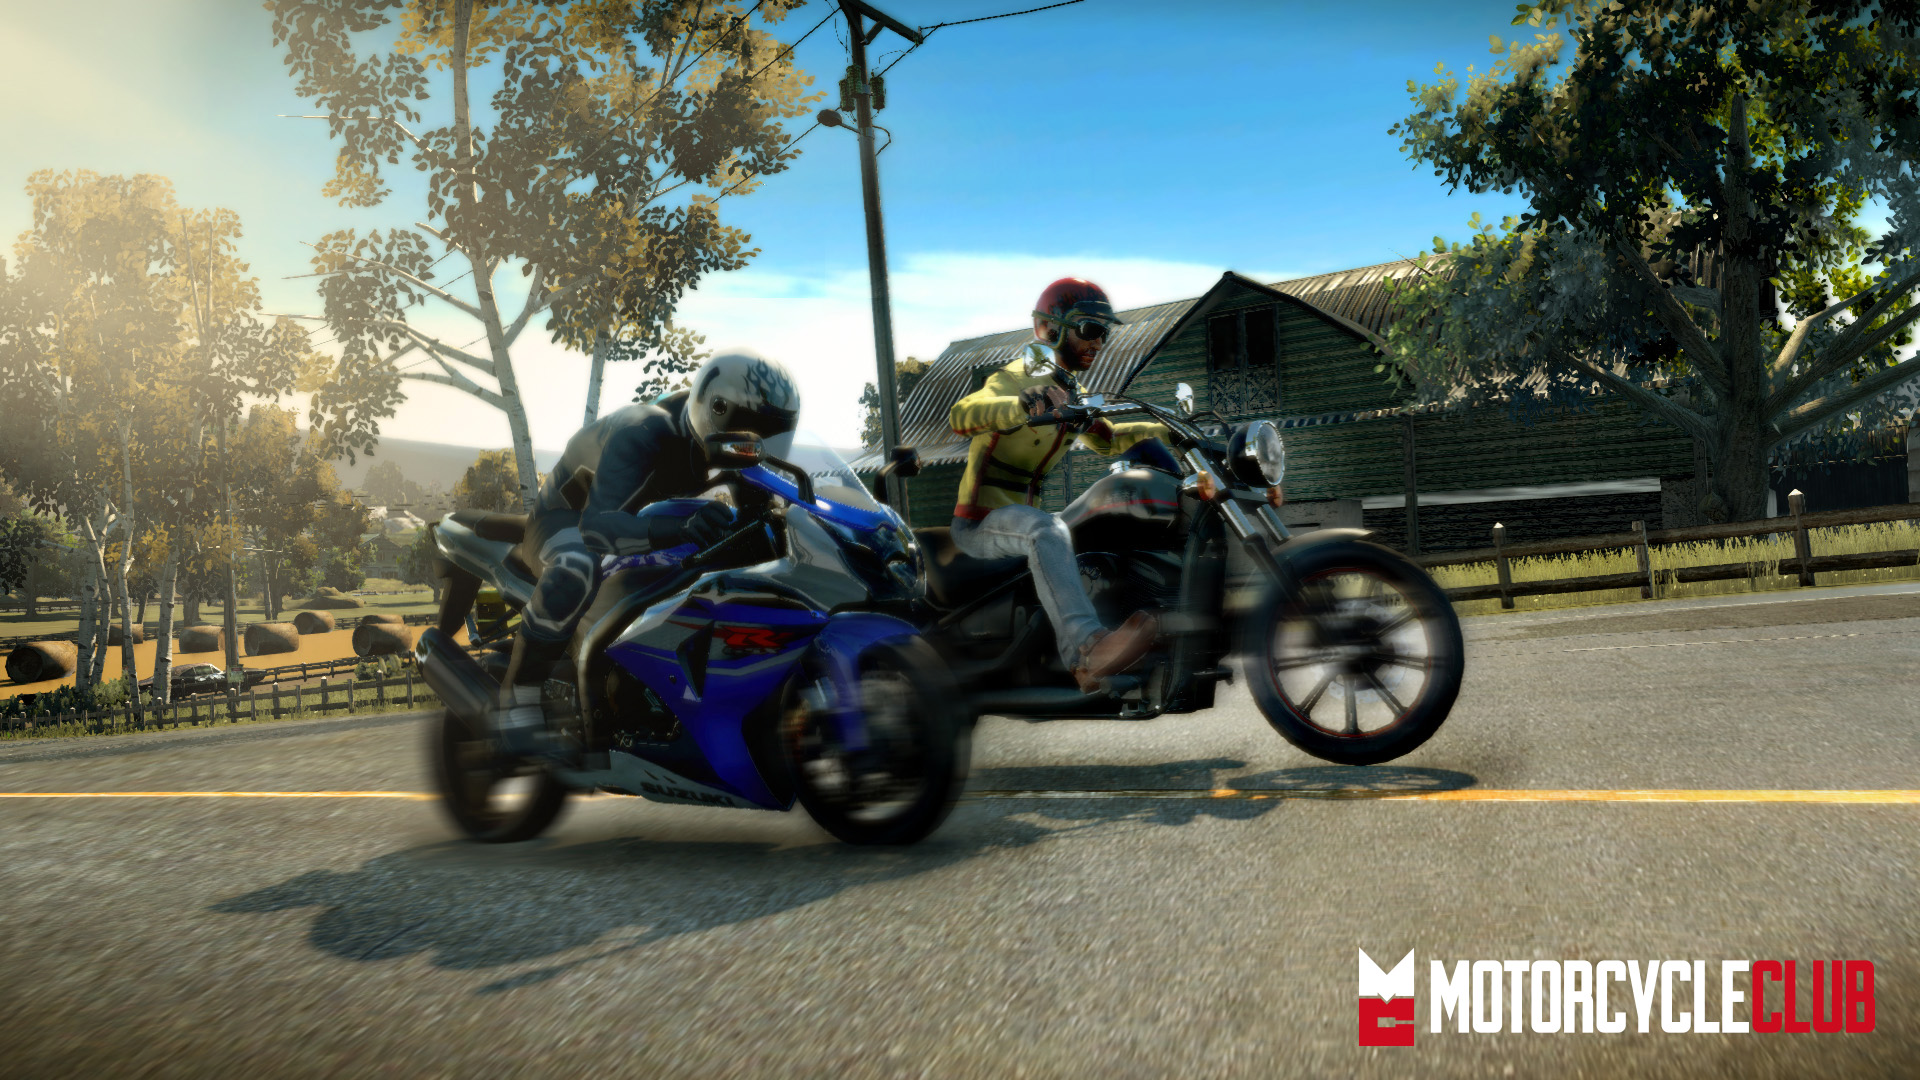 Motorcycle Club on Steam